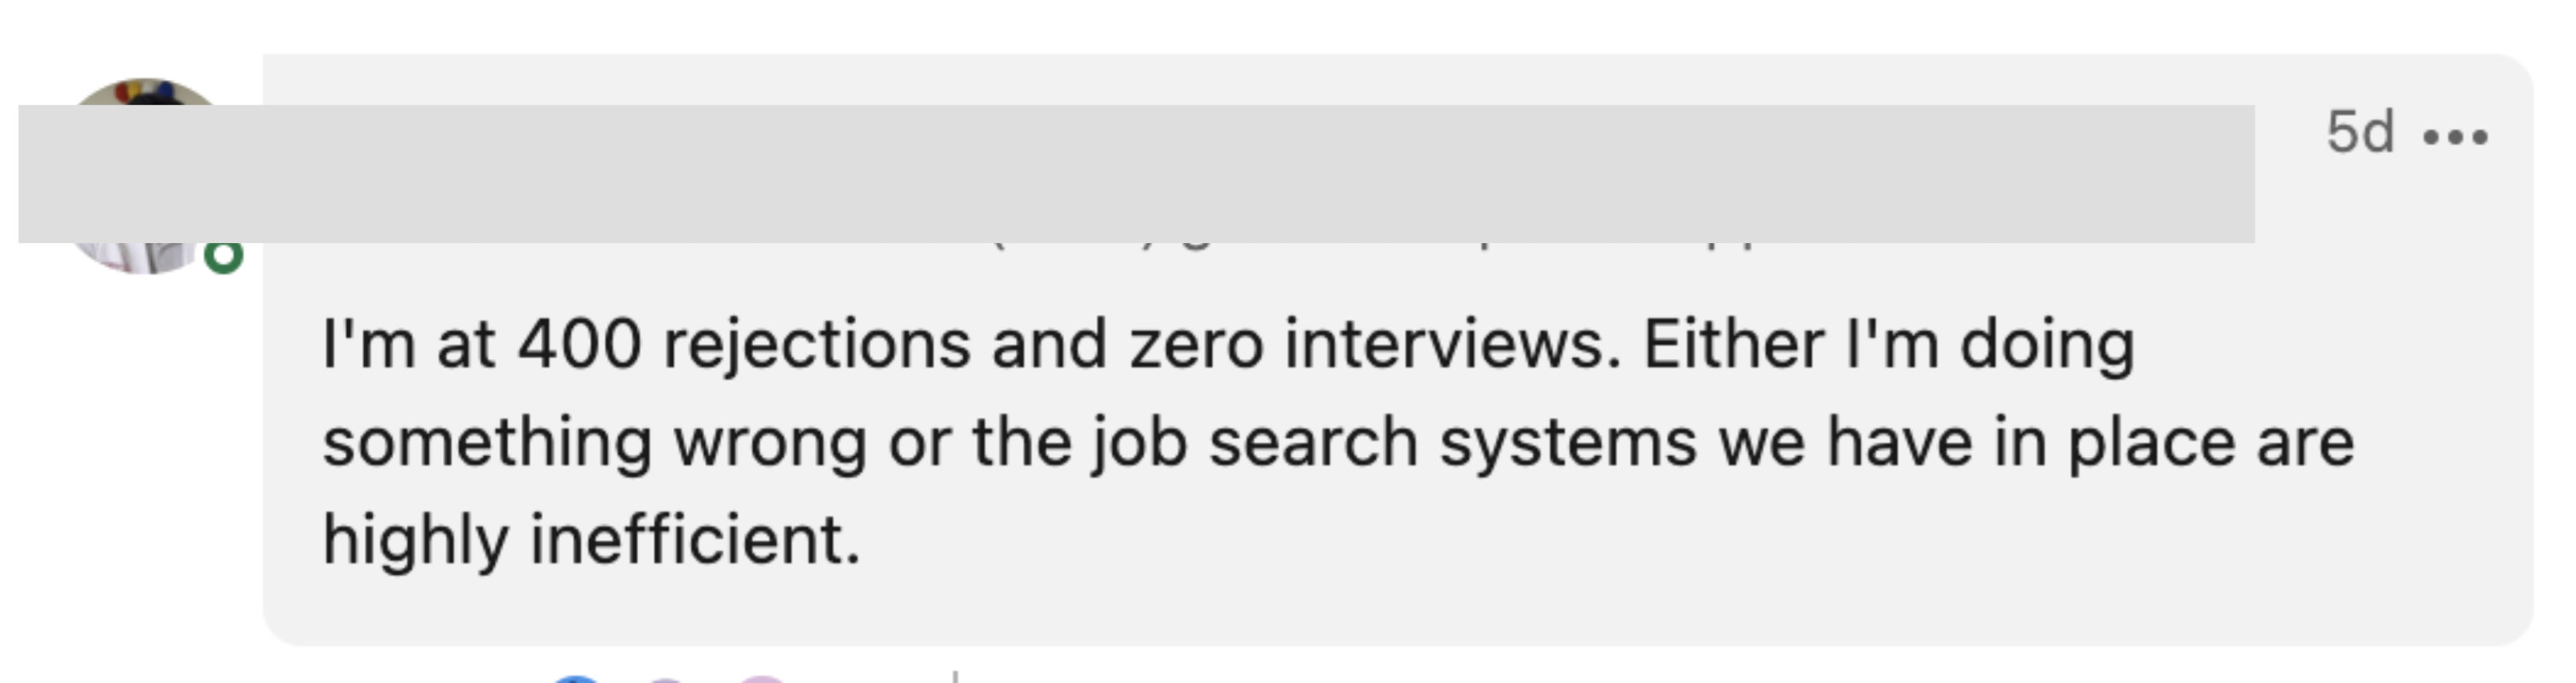 One person said &quot;I&#x27;m at 400 rejections and zero interviews. Either I&#x27;m doing something wrong or the job search systems we have in place are highly inefficient&quot;